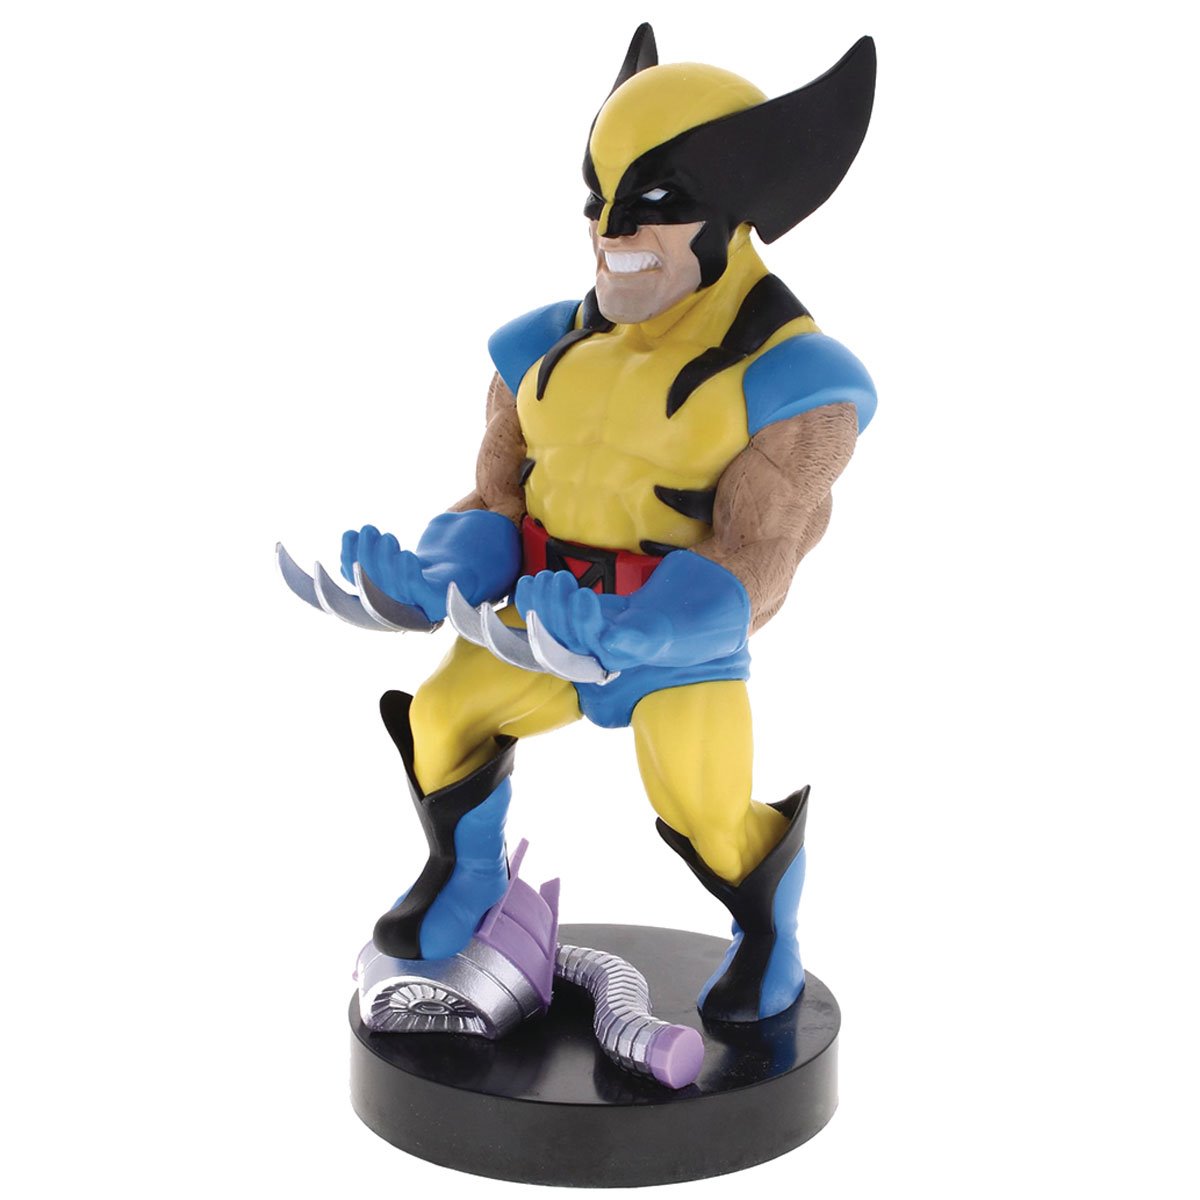 X-Men Wolverine Cable Guy Controller Holder by Exquisite Gaming -Exquisite Gaming - India - www.superherotoystore.com